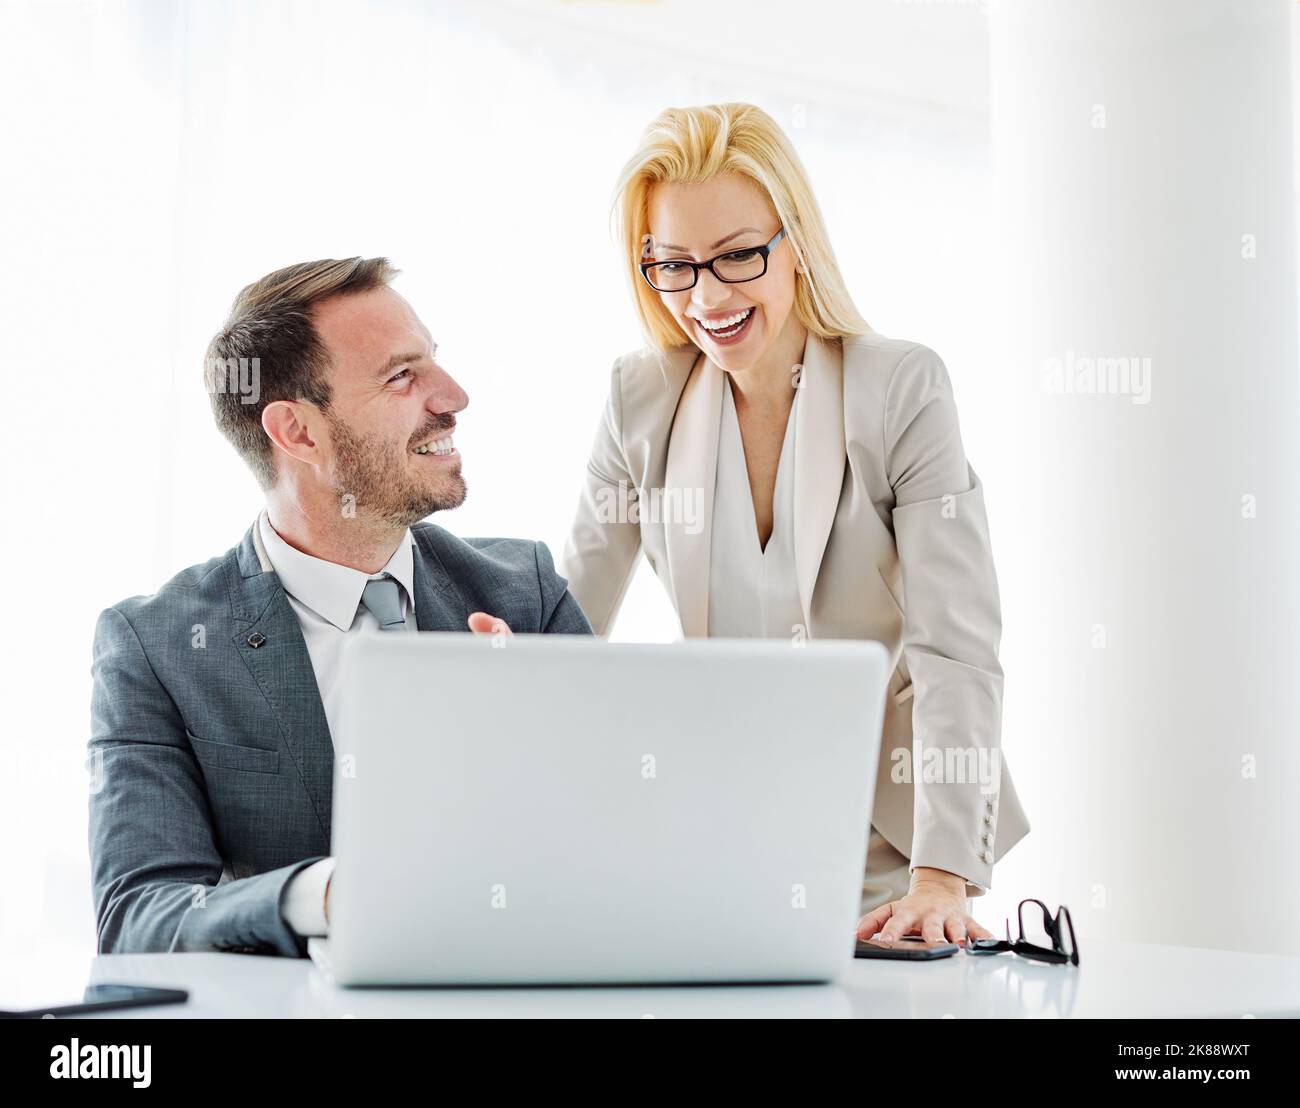 young business people meeting office teamwork group success corporate discussion laptop Stock Photo